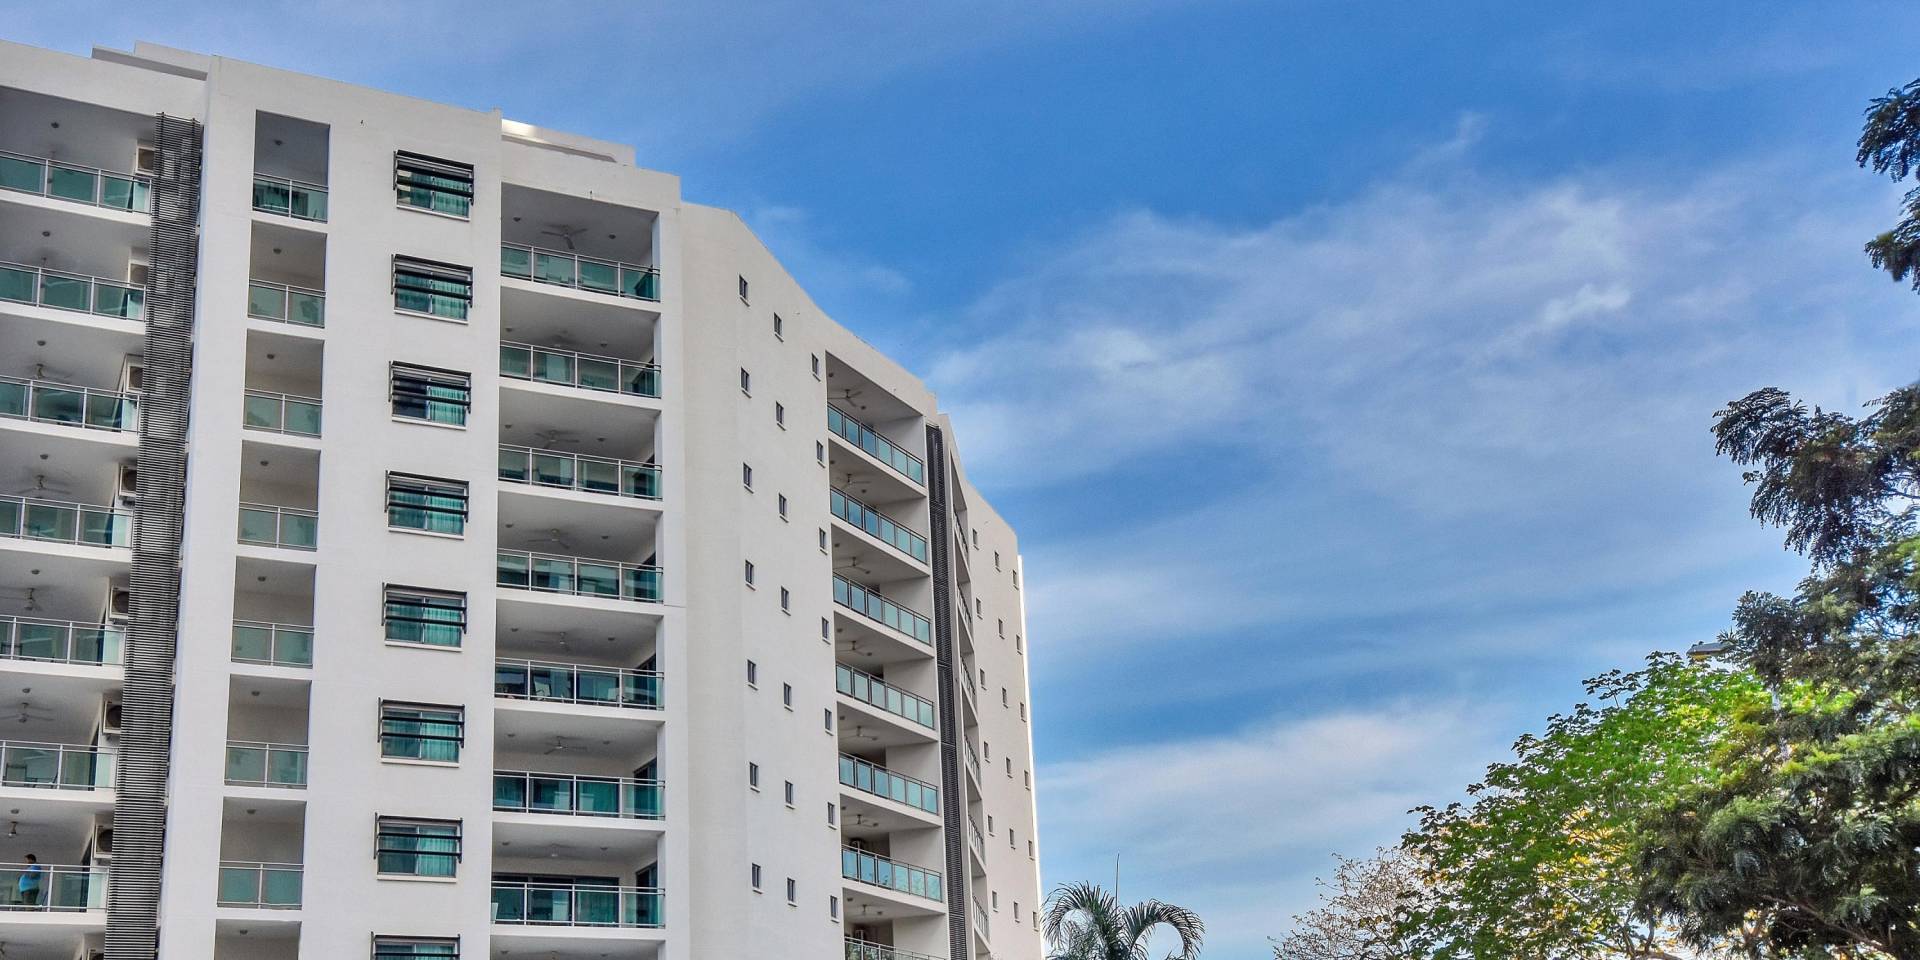 Great deals on Darwin apartment accommodation